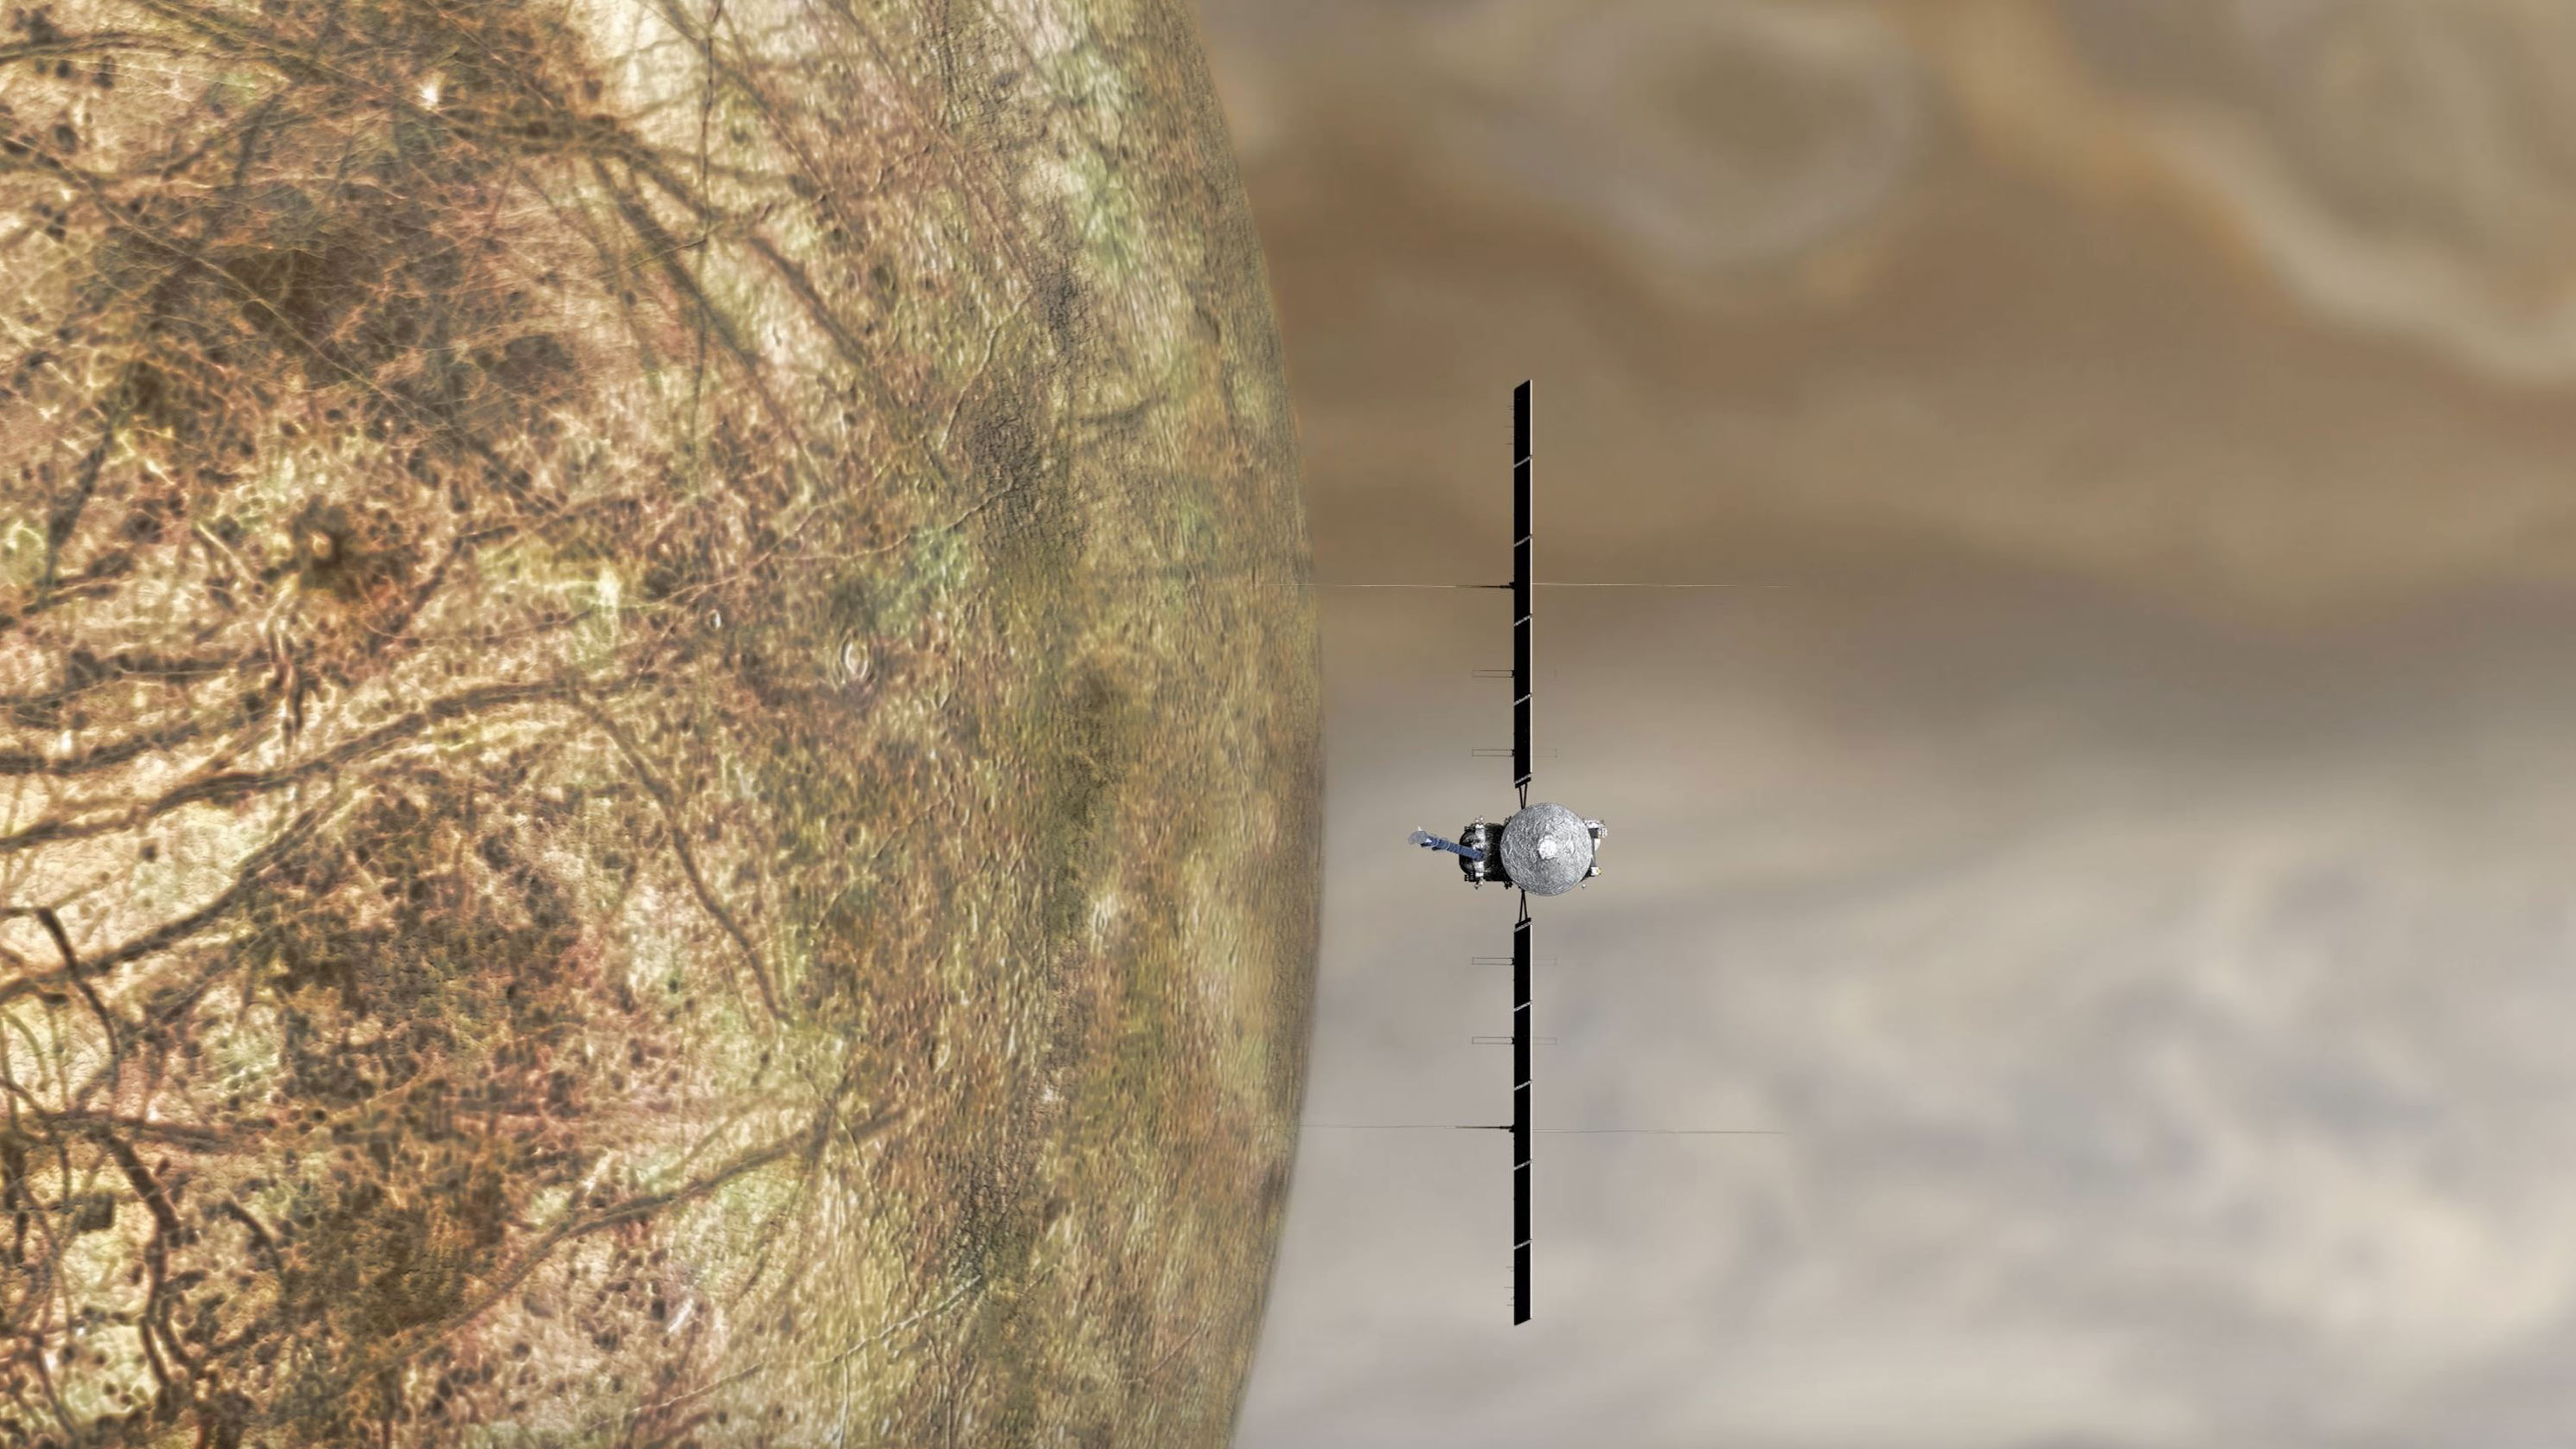 An illustration of Europa Clipper flying by Europa.